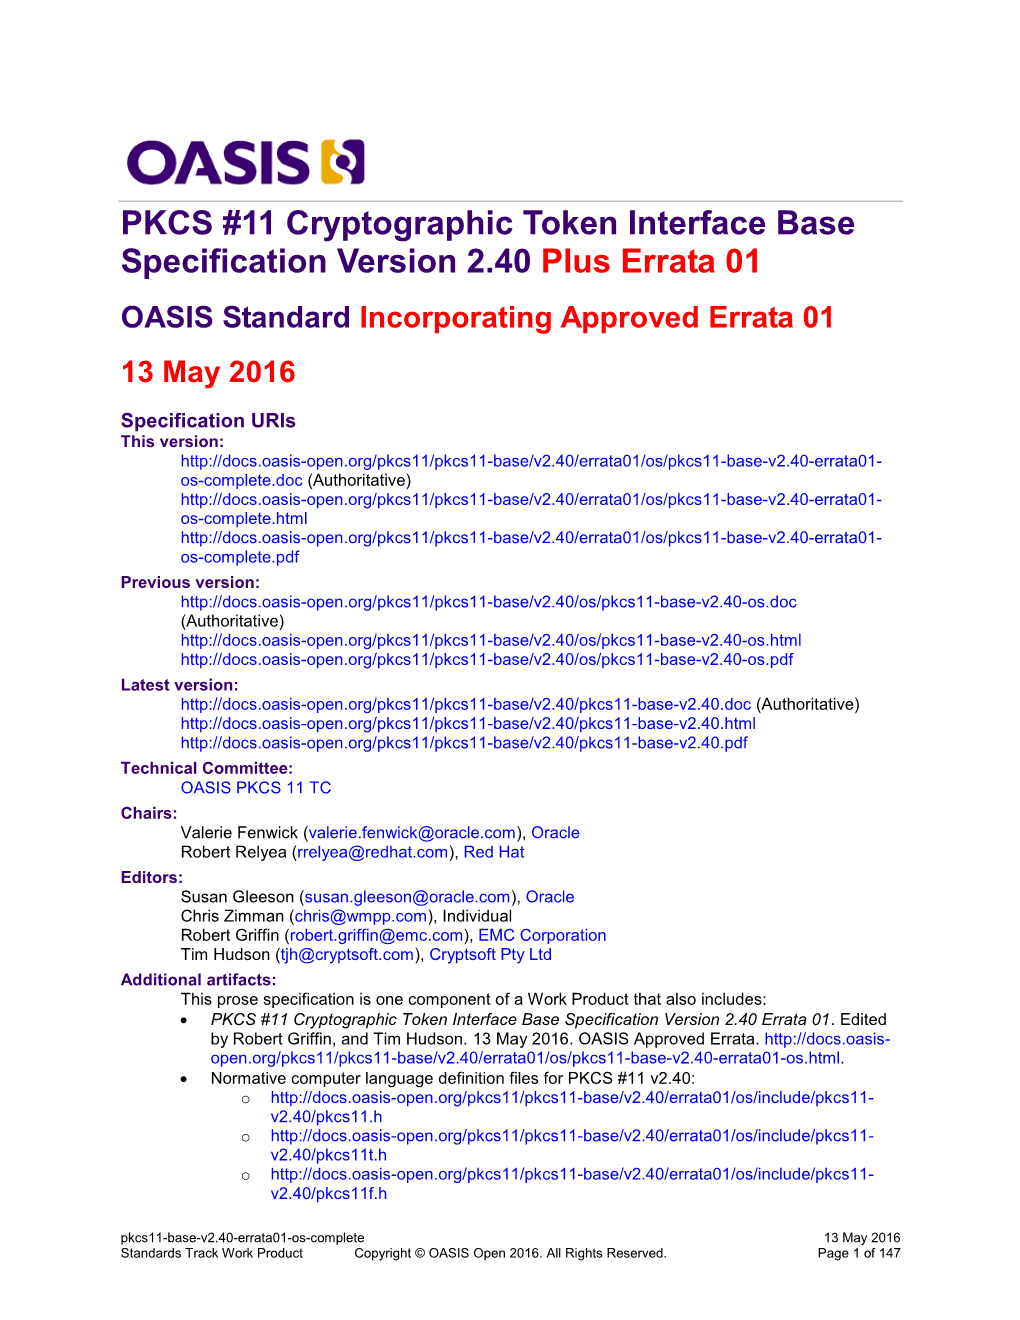 PKCS #11 Cryptographic Token Interface Base Specification Version 2.40 Plus Errata 01 OASIS Standard Incorporating Approved Errata 01 13 May 2016